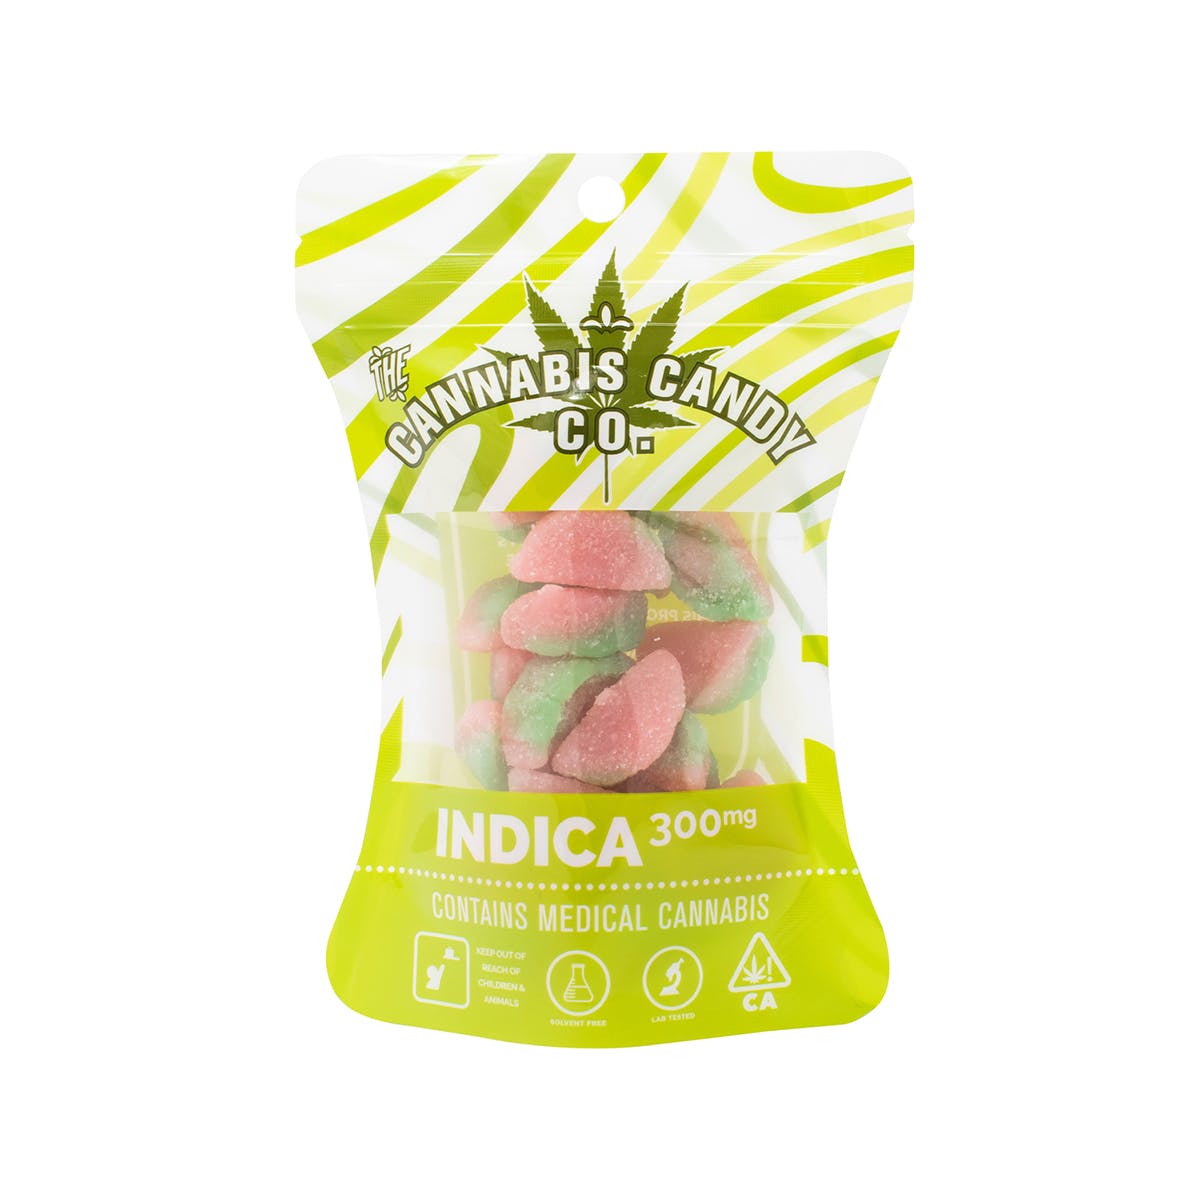 edible-the-cannabis-candy-co-watermelon-wedges-300mg-indica